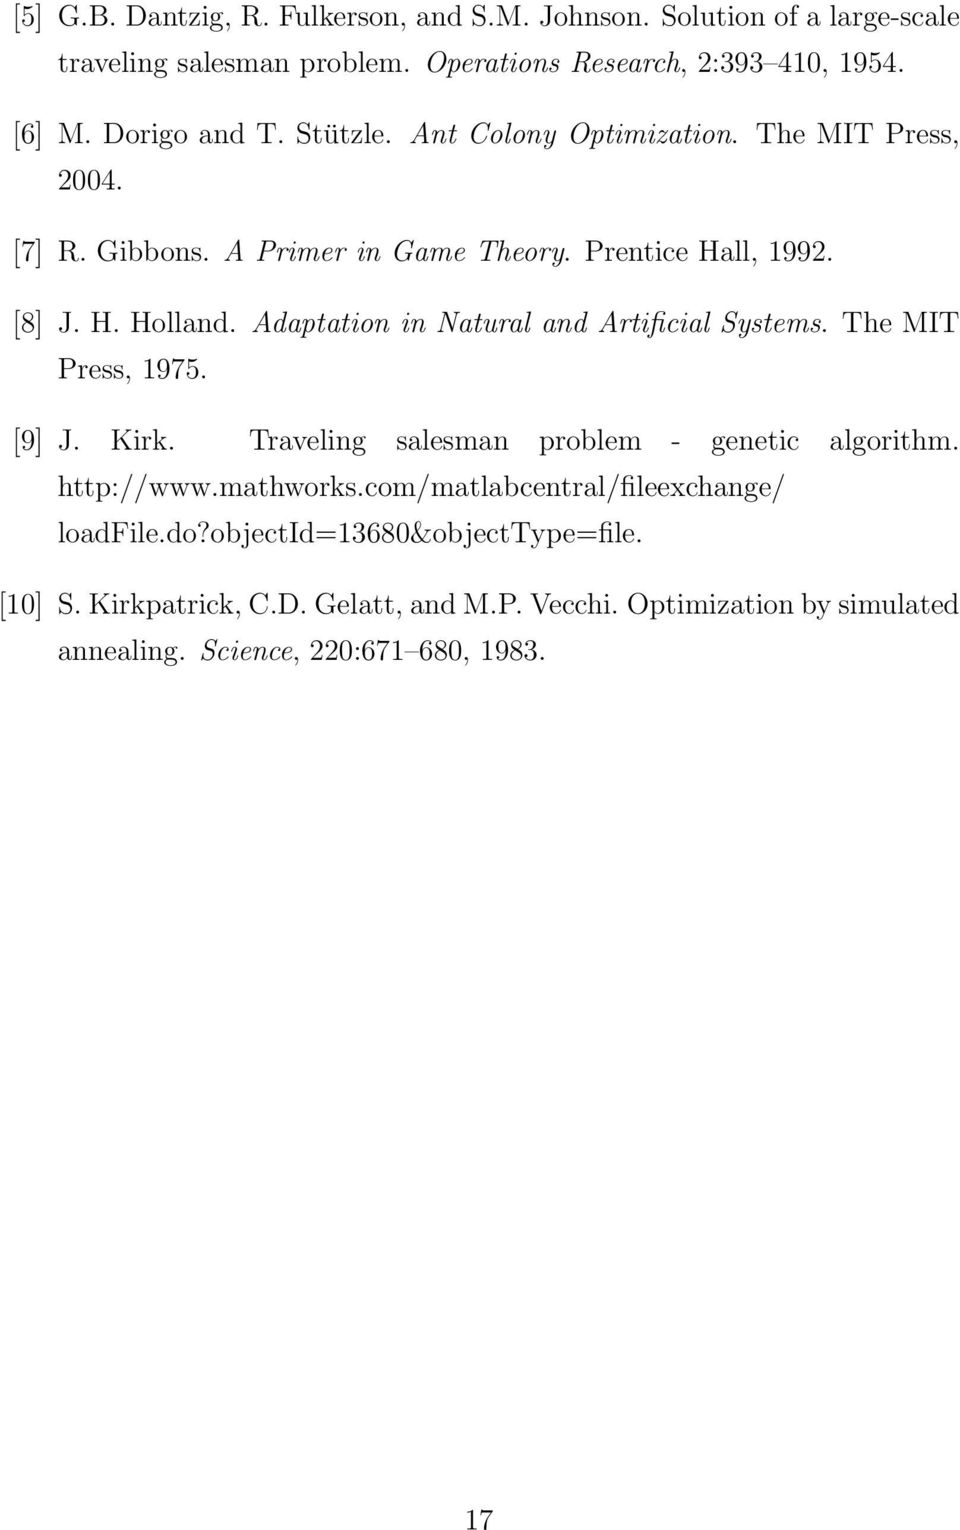 Adaptation in Natural and Artificial Systems. The MIT Press, 1975. [9] J. Kirk. Traveling salesman problem - genetic algorithm. http://www.mathworks.